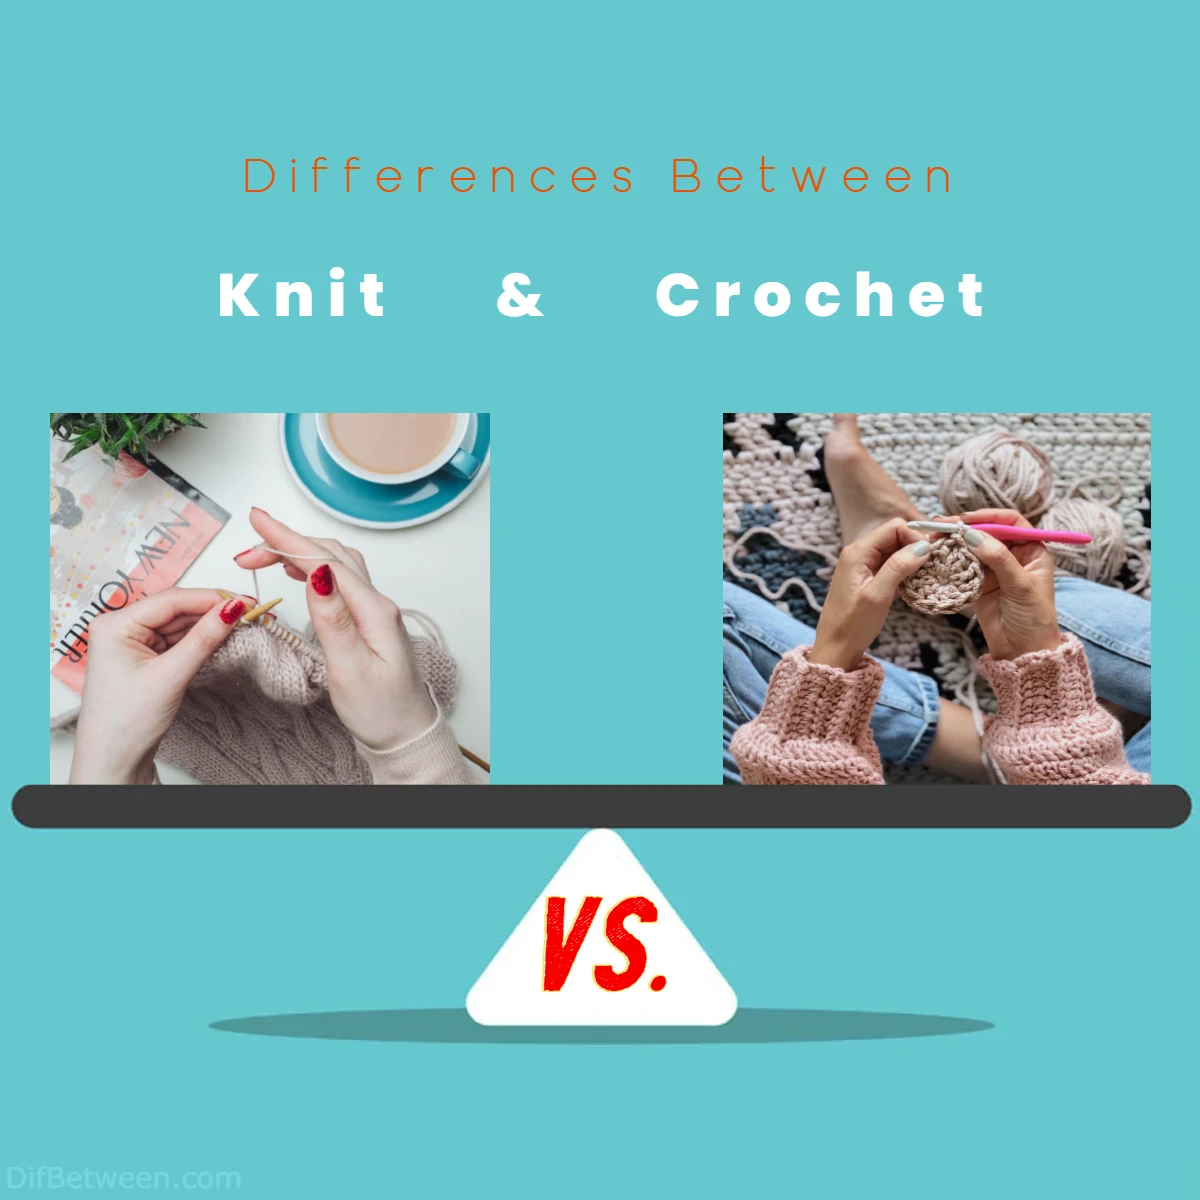 Differences Between Knit vs Crochet